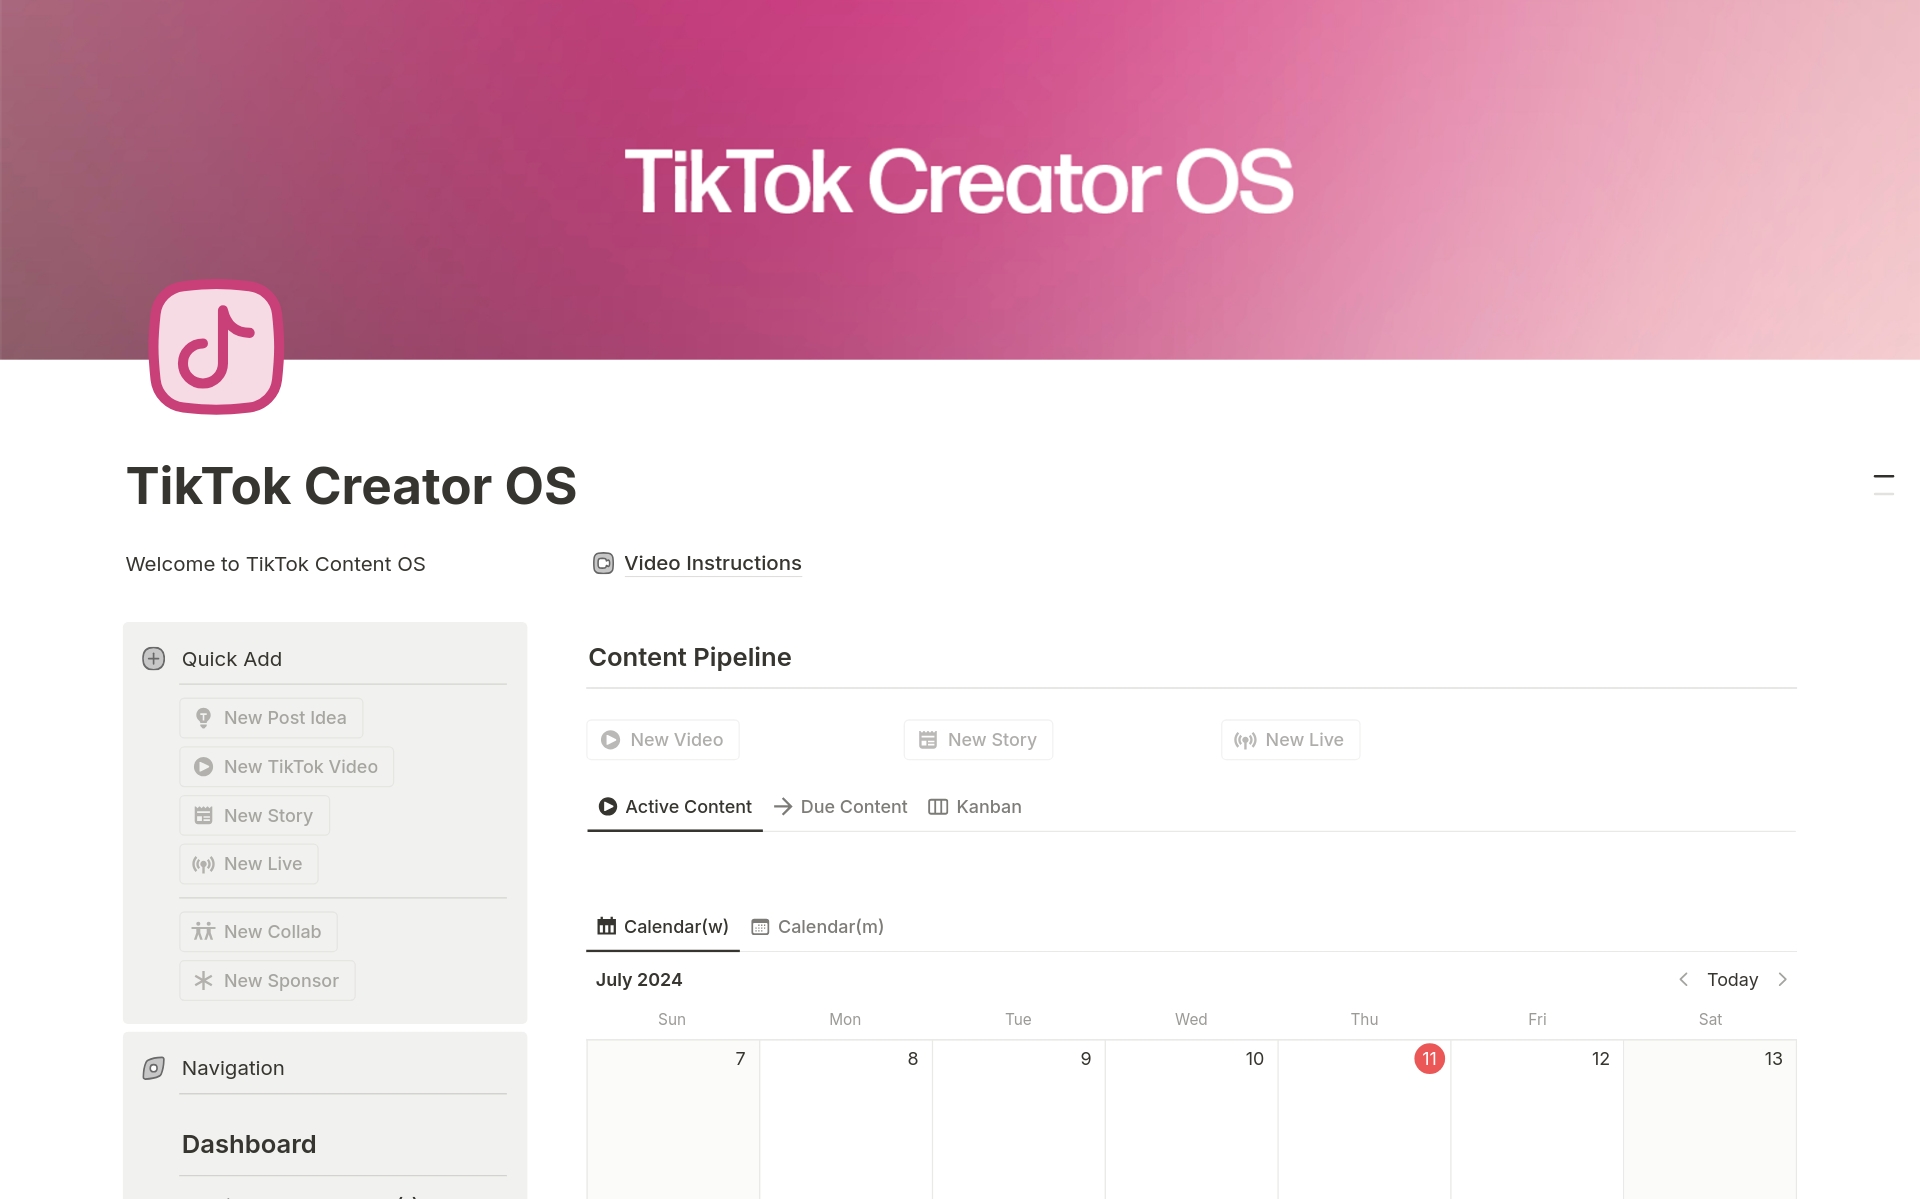 Save hours on planning and disorganized content creation for your TikTok creator business with an AI-Powered Notion template